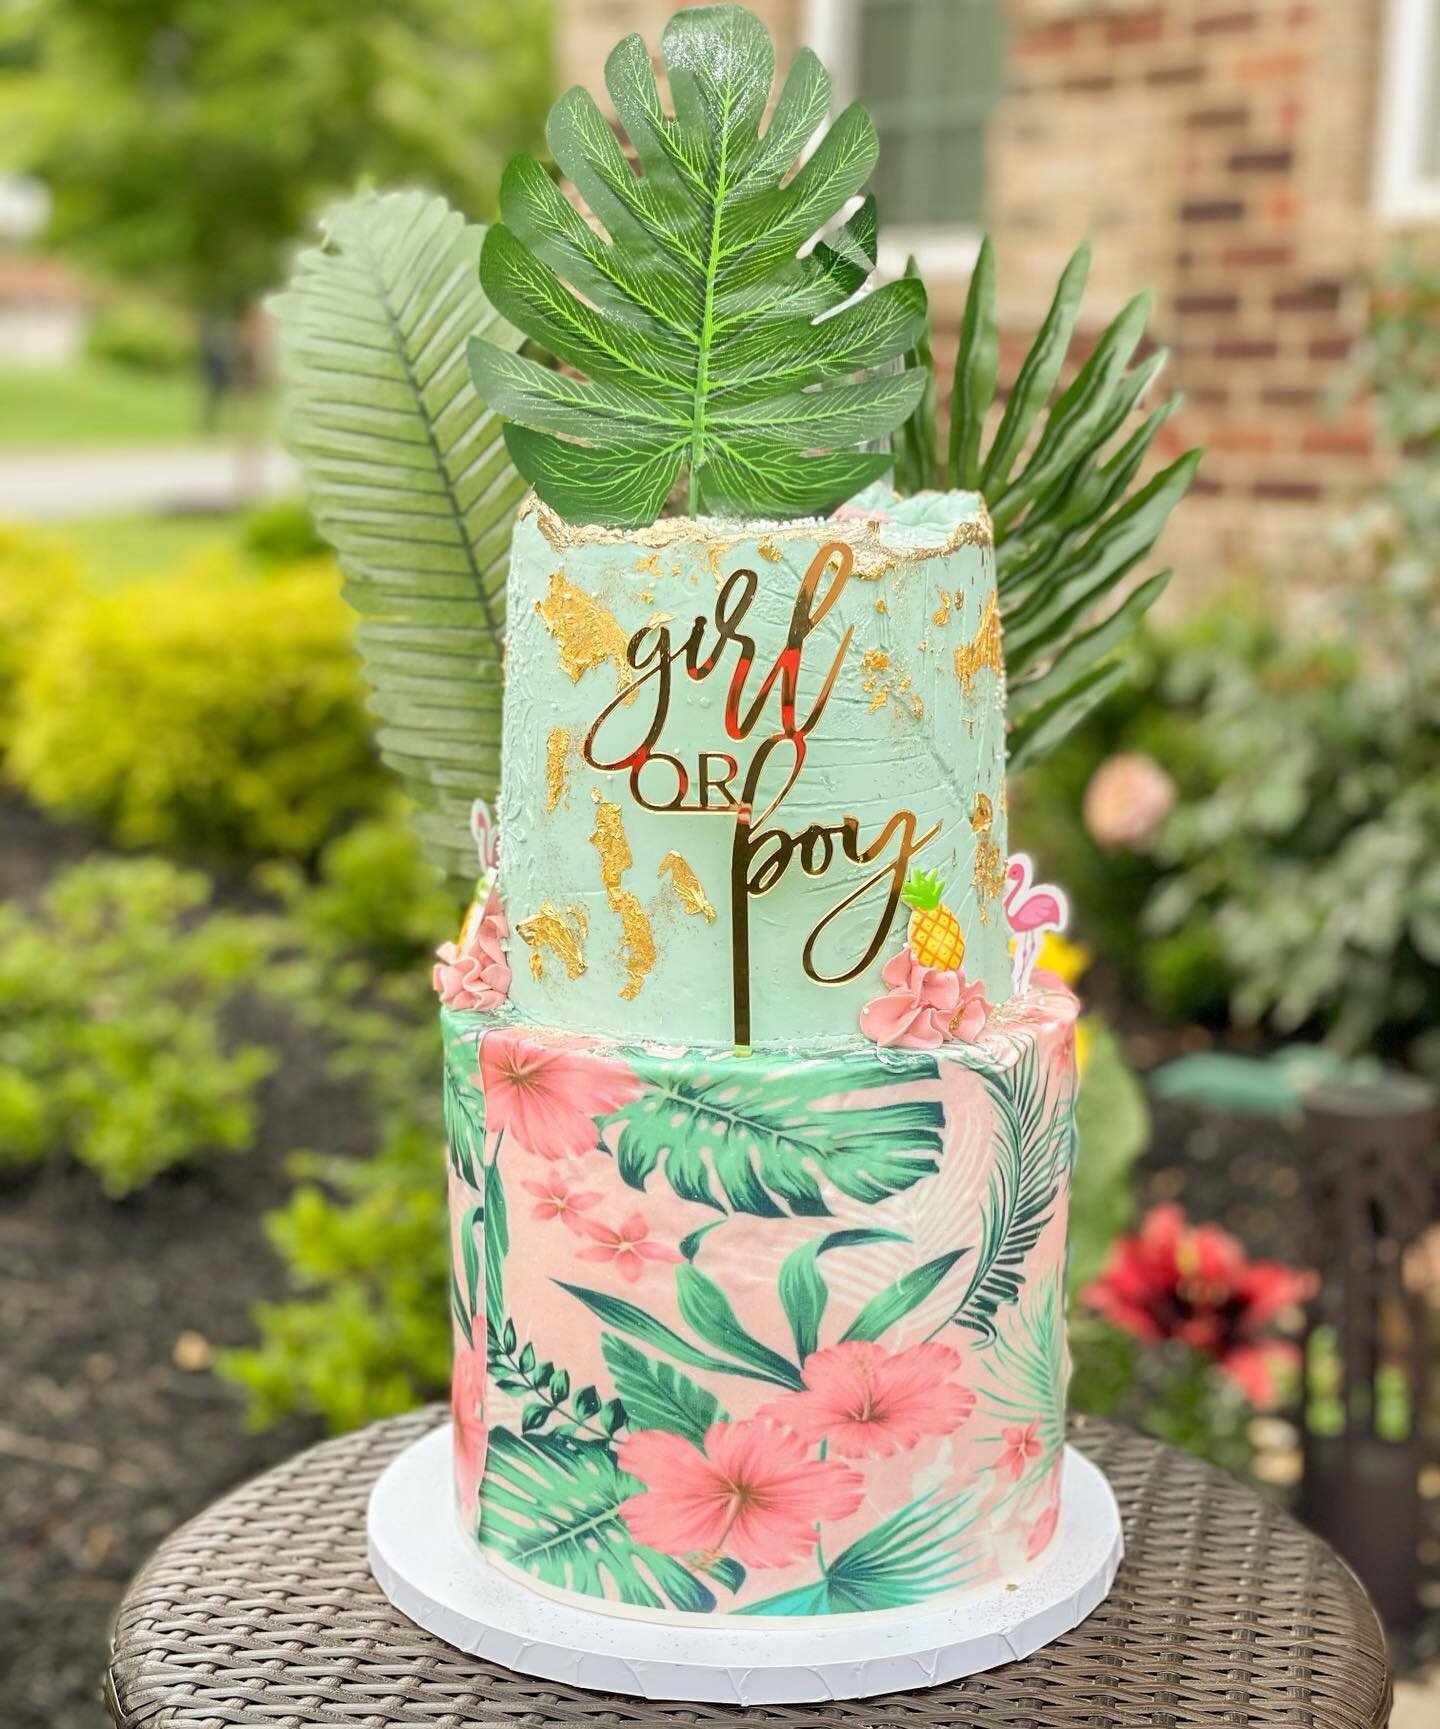 It&rsquo;s a girl! 🌸🌷💕🙈✨ Had a blast making this cake for a dear friend. I wanted to jump out of my comfort zone so I tried some techniques that I&rsquo;ve been wanting to practice. Applying an edible image, buttercream floral impressions, and st